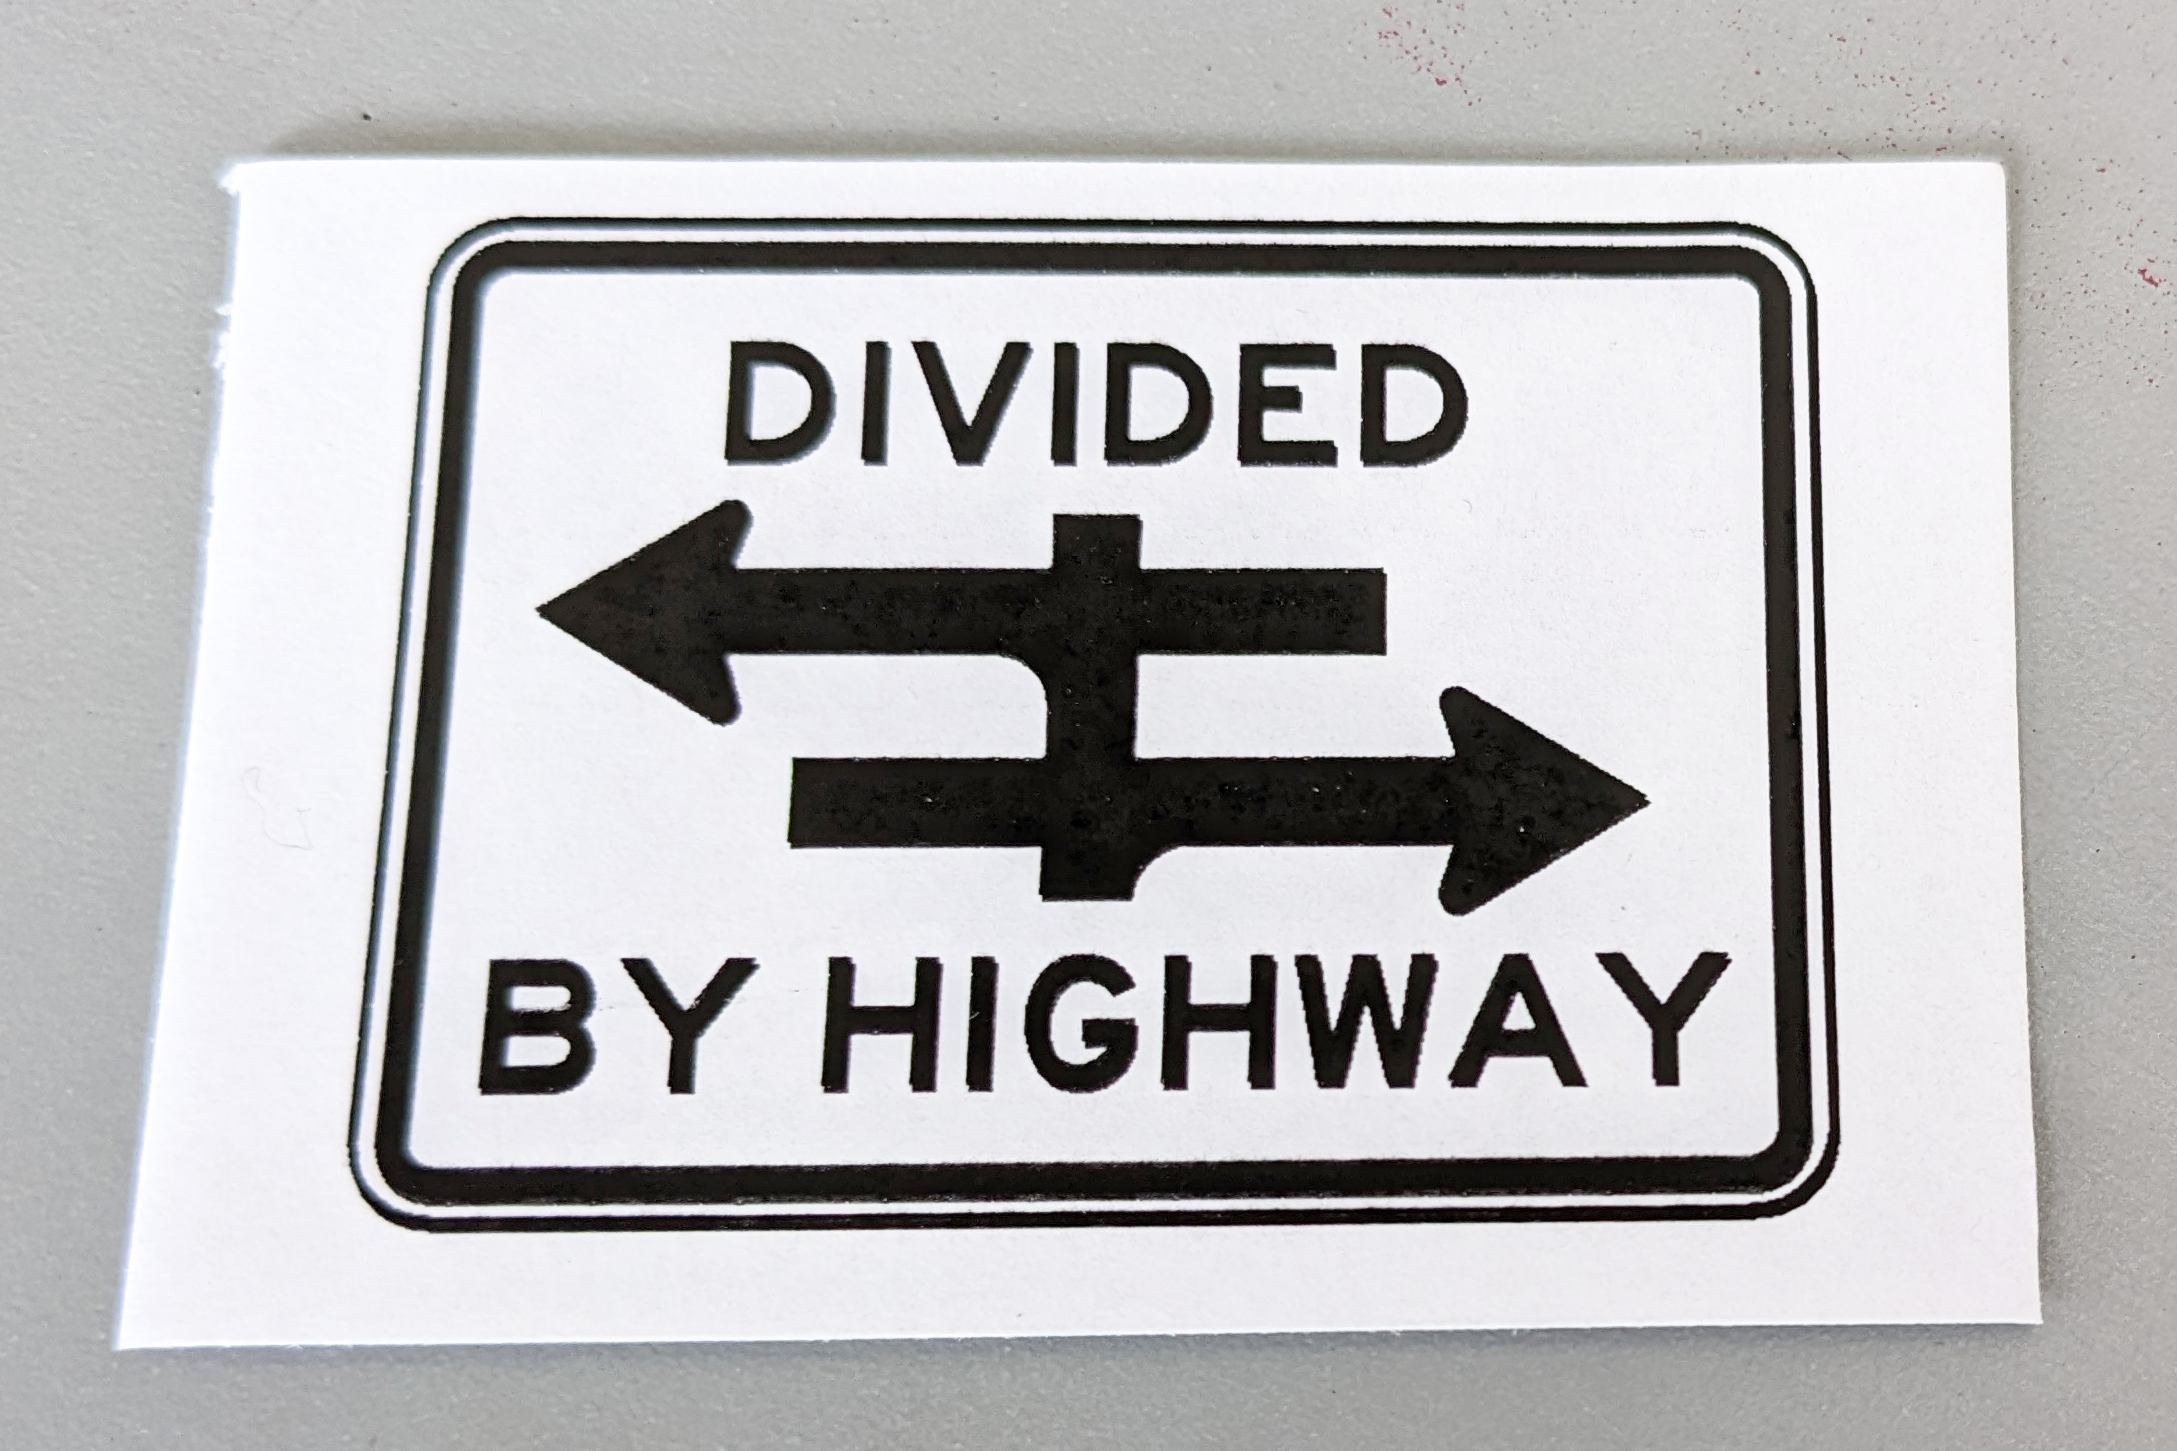 Divided by Highway sign